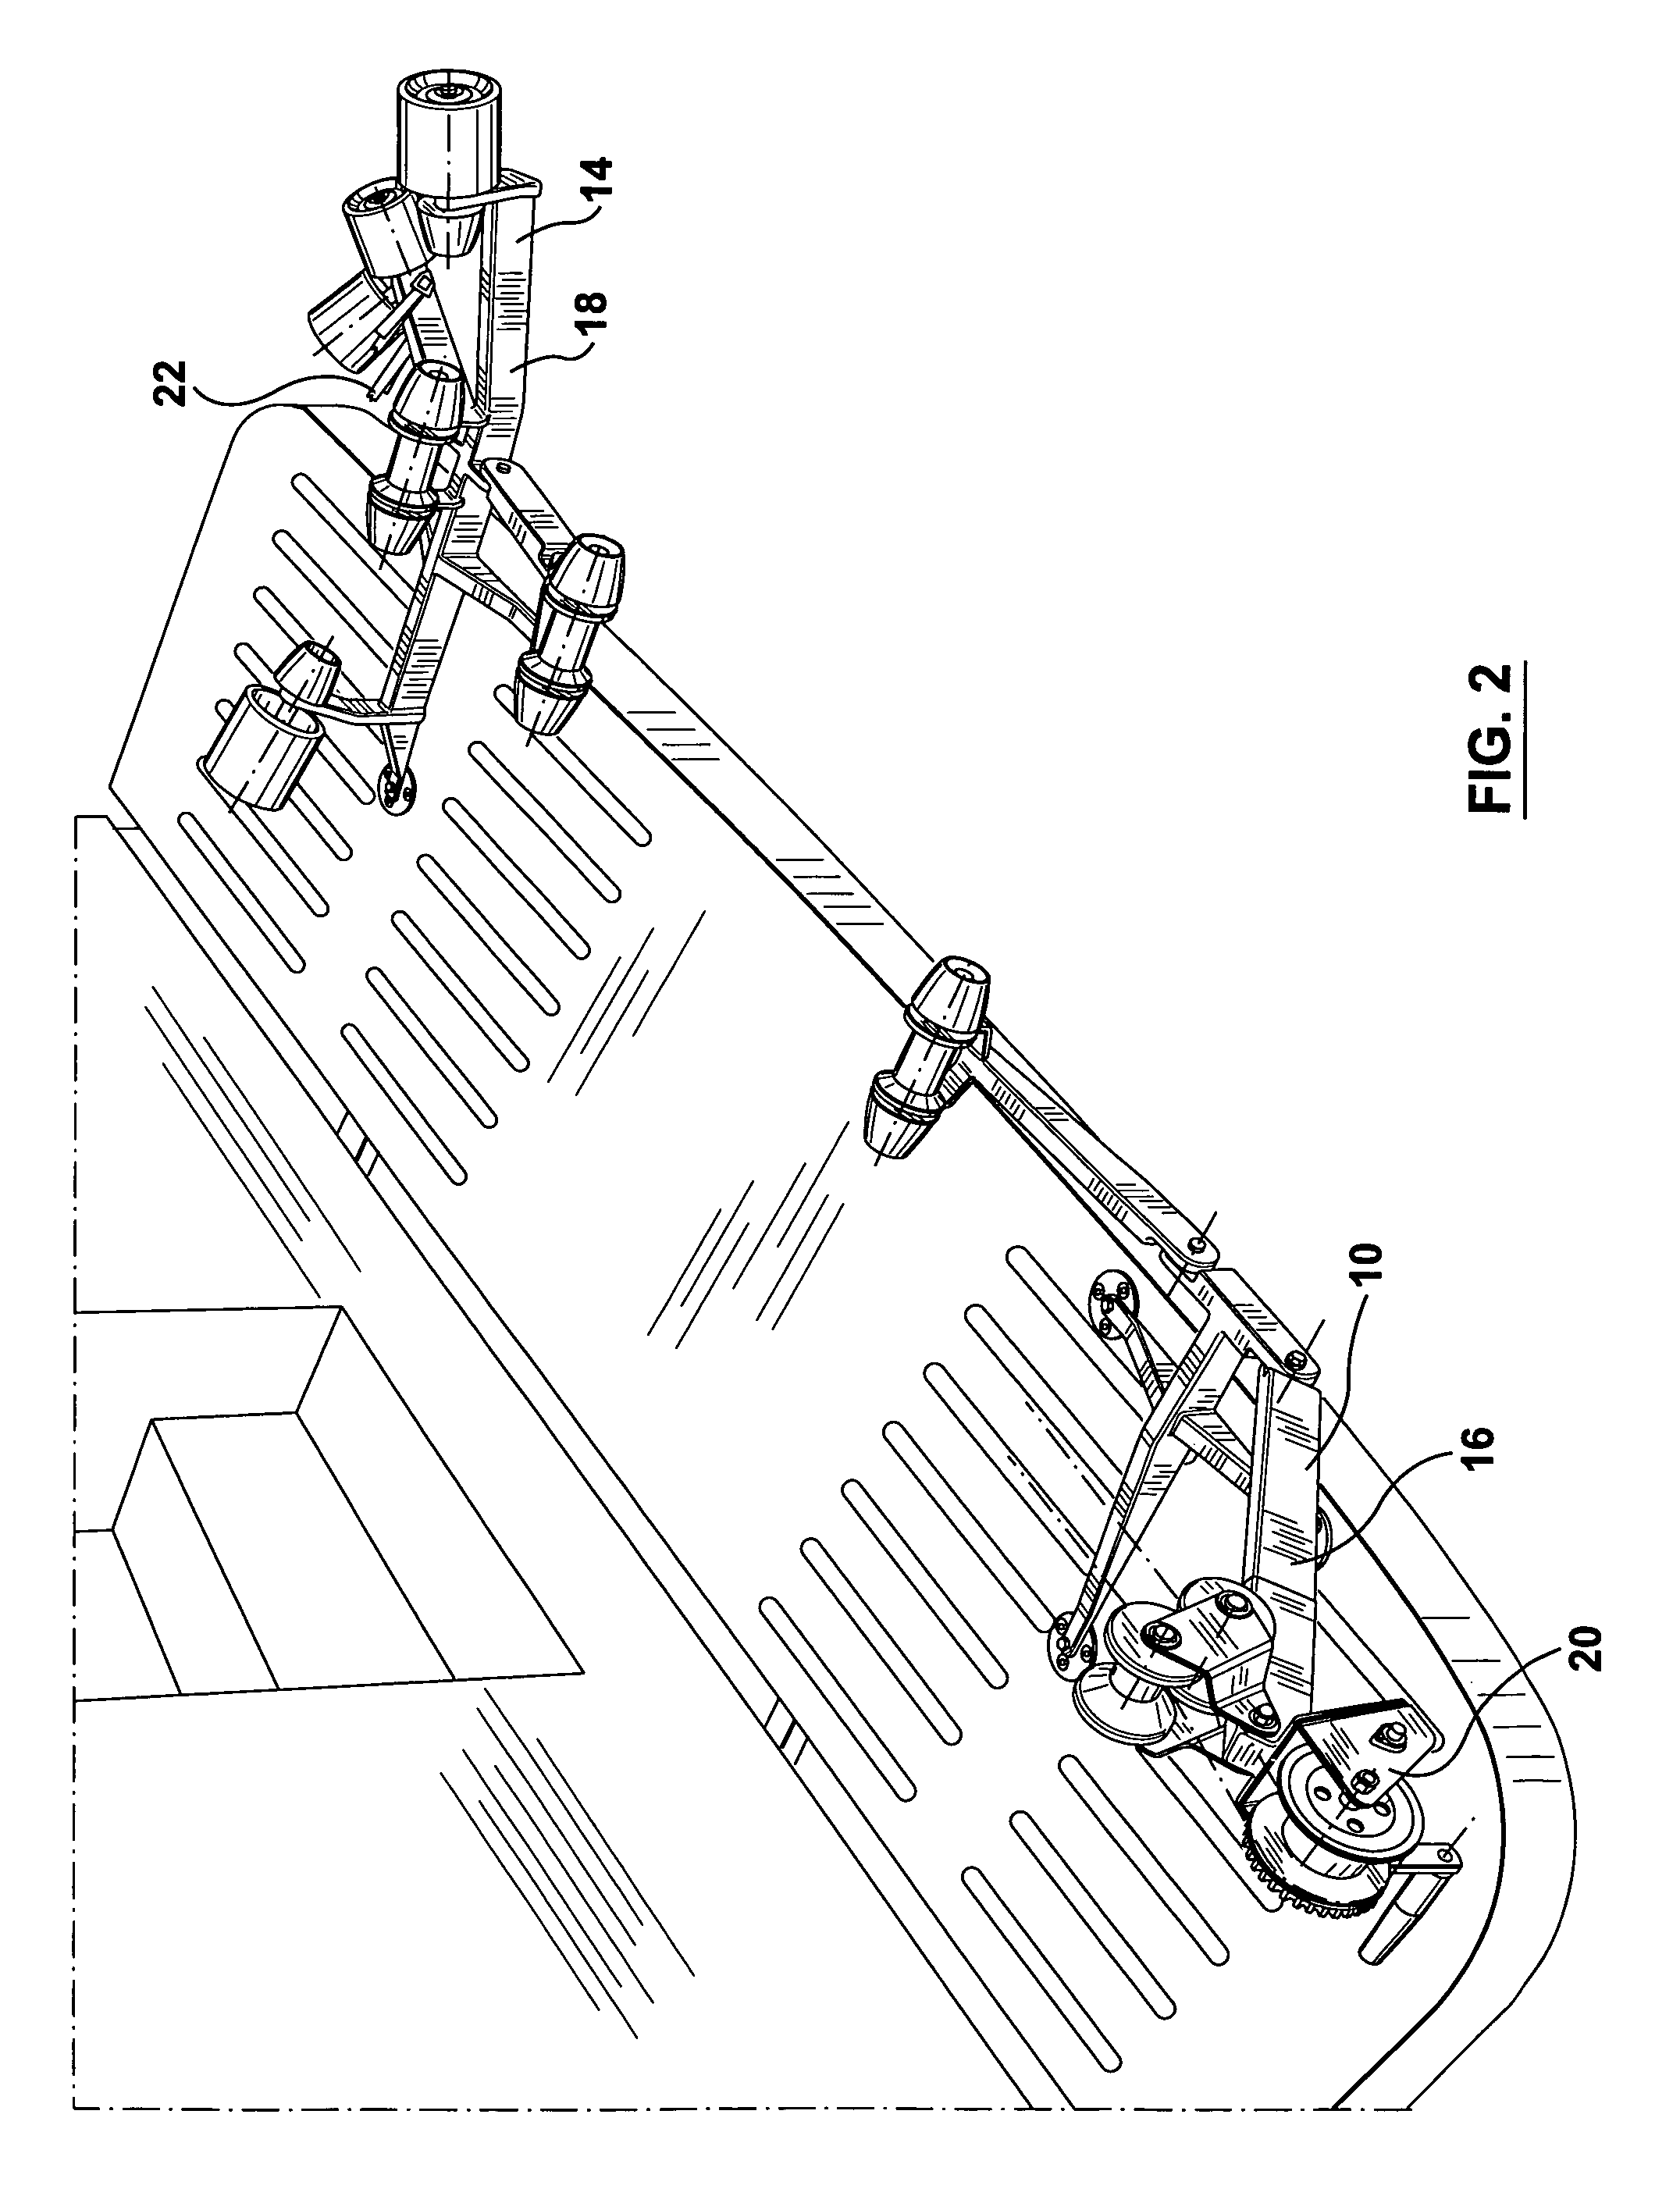 Support assembly for loading and securing a tender